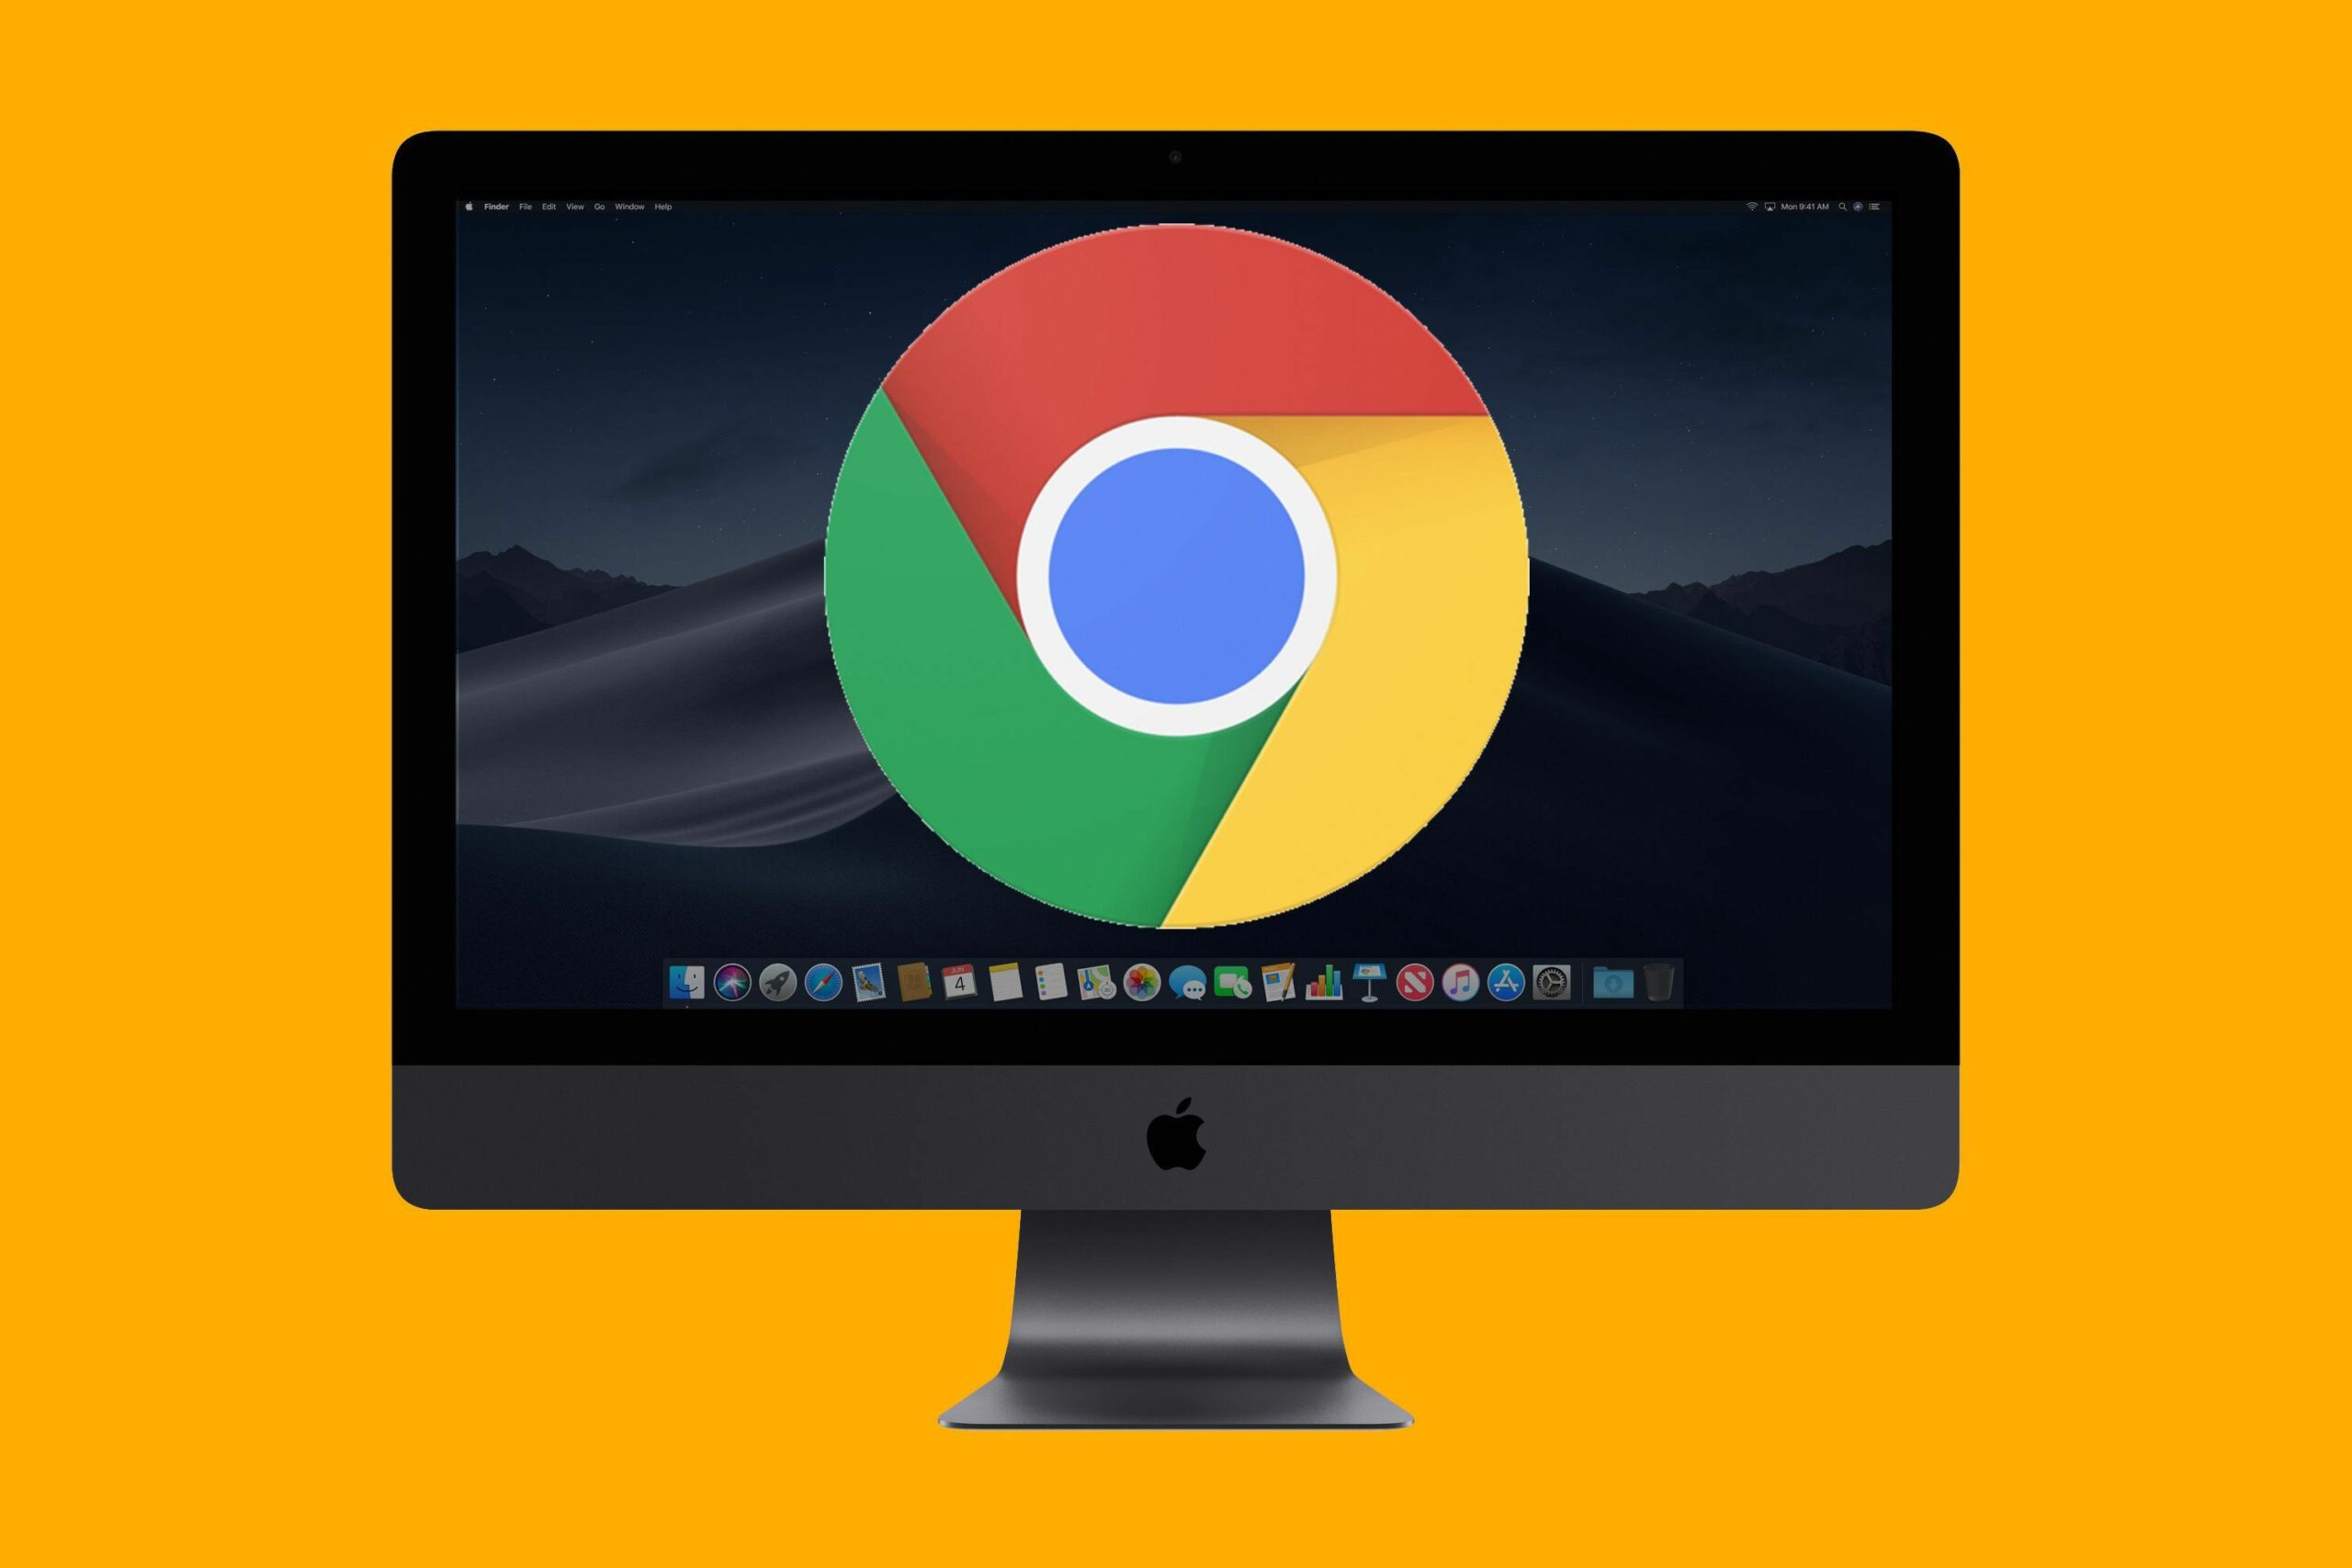 chrome on mac 5bc35d81c9e77c0051c75a96 9b30664e53764b78a1aa4fe5b1de1d65 scaled